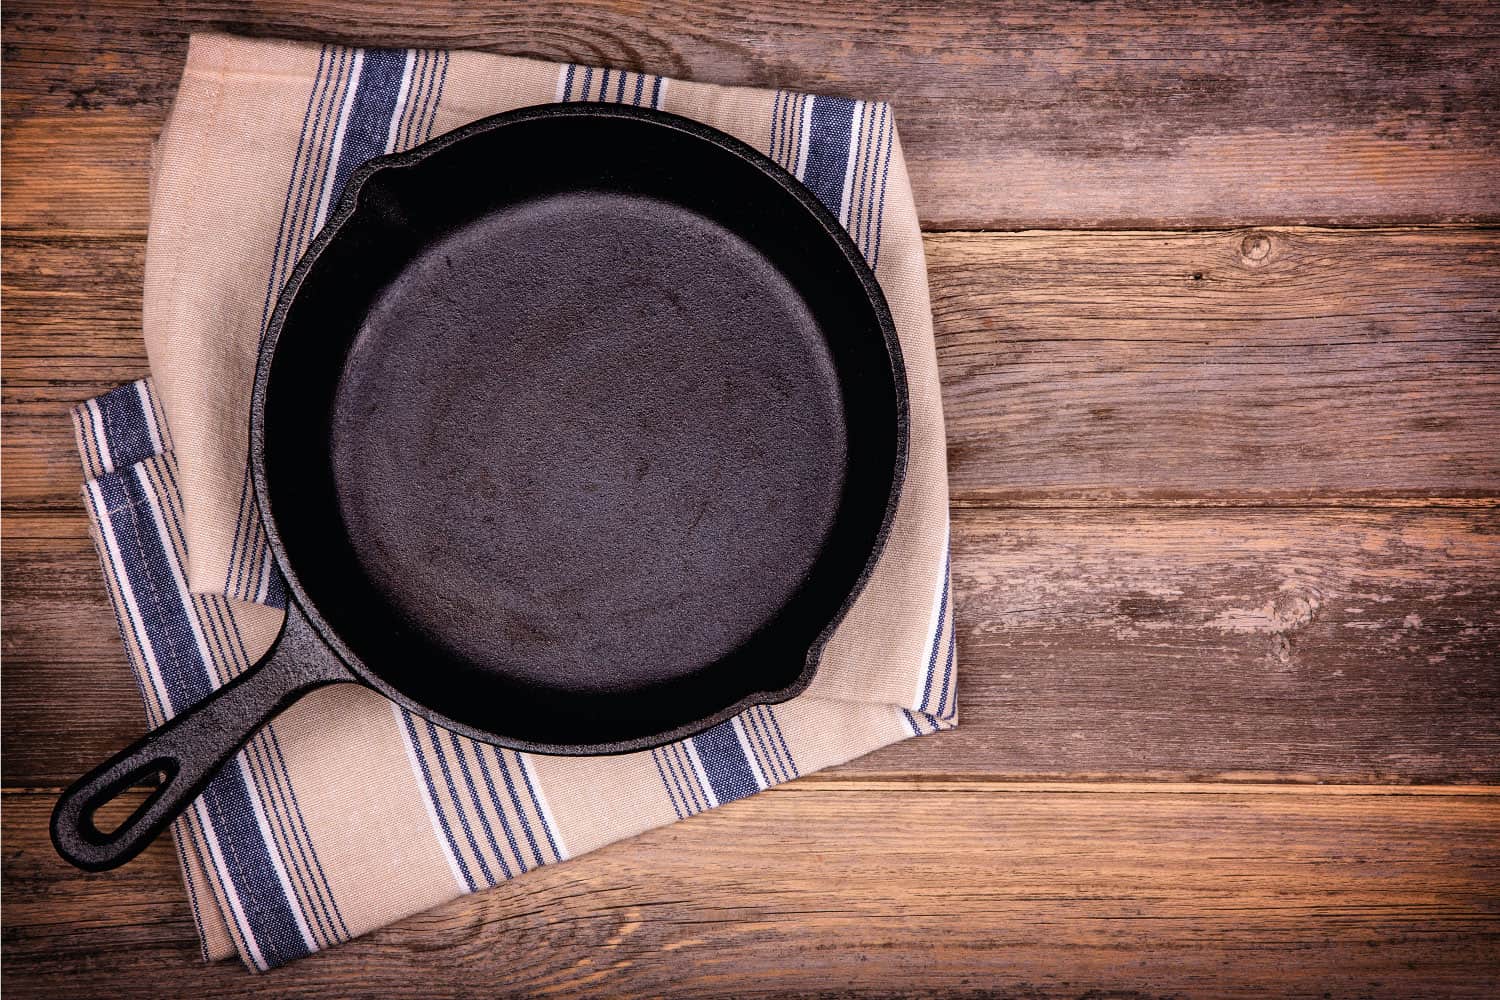 Empty cast iron skillet with tea towel, over old wood background